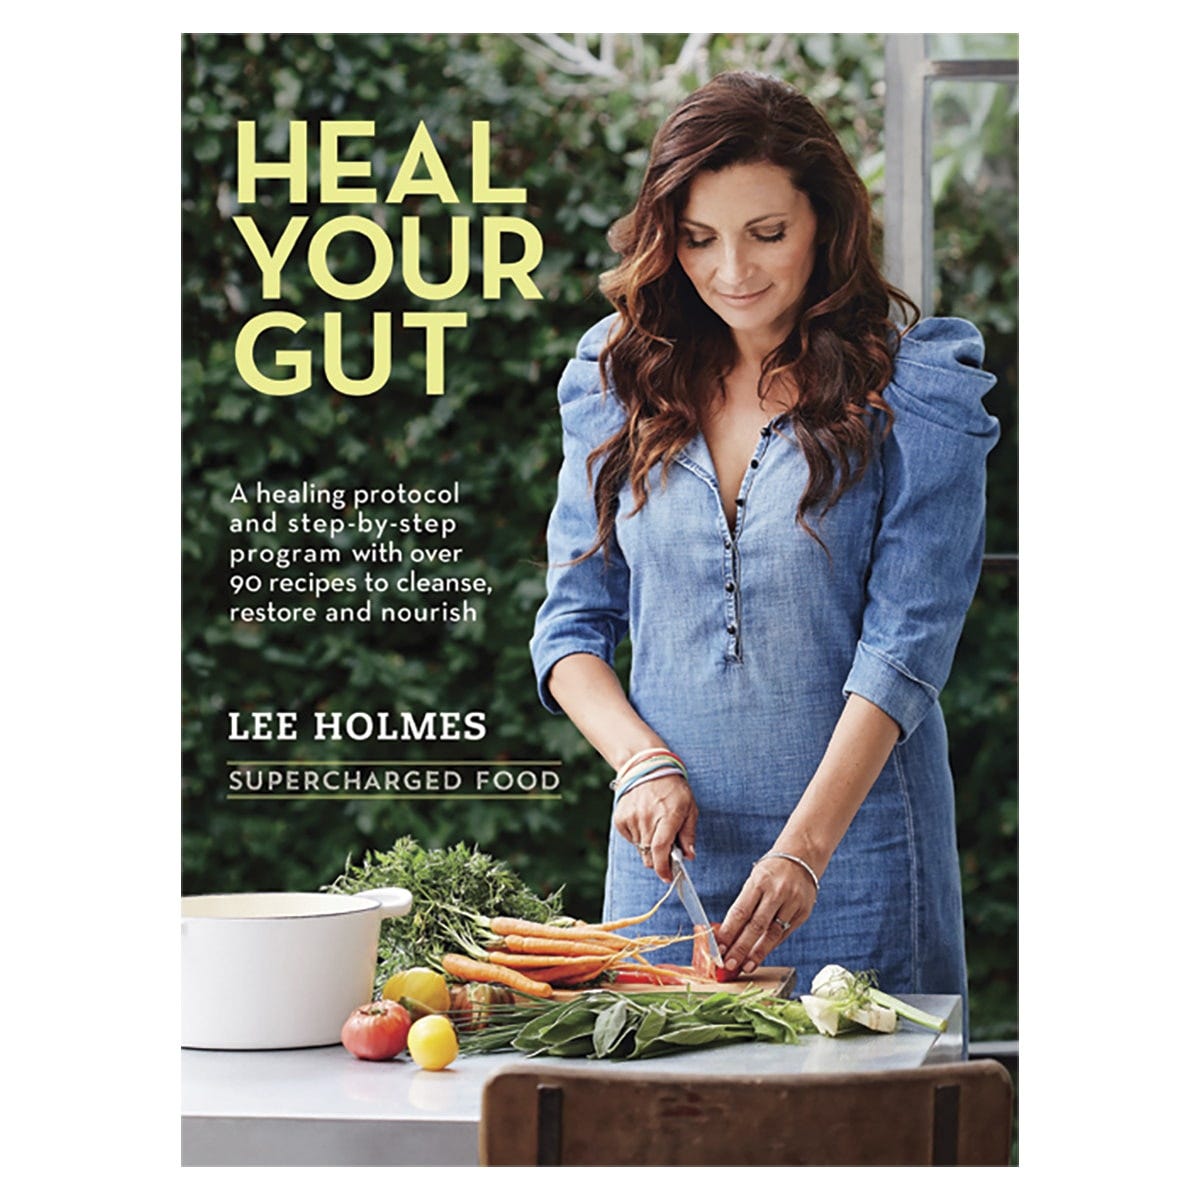 Book Heal Your Gut: Supercharged Food by Lee Holmes - Dr Earth - Books